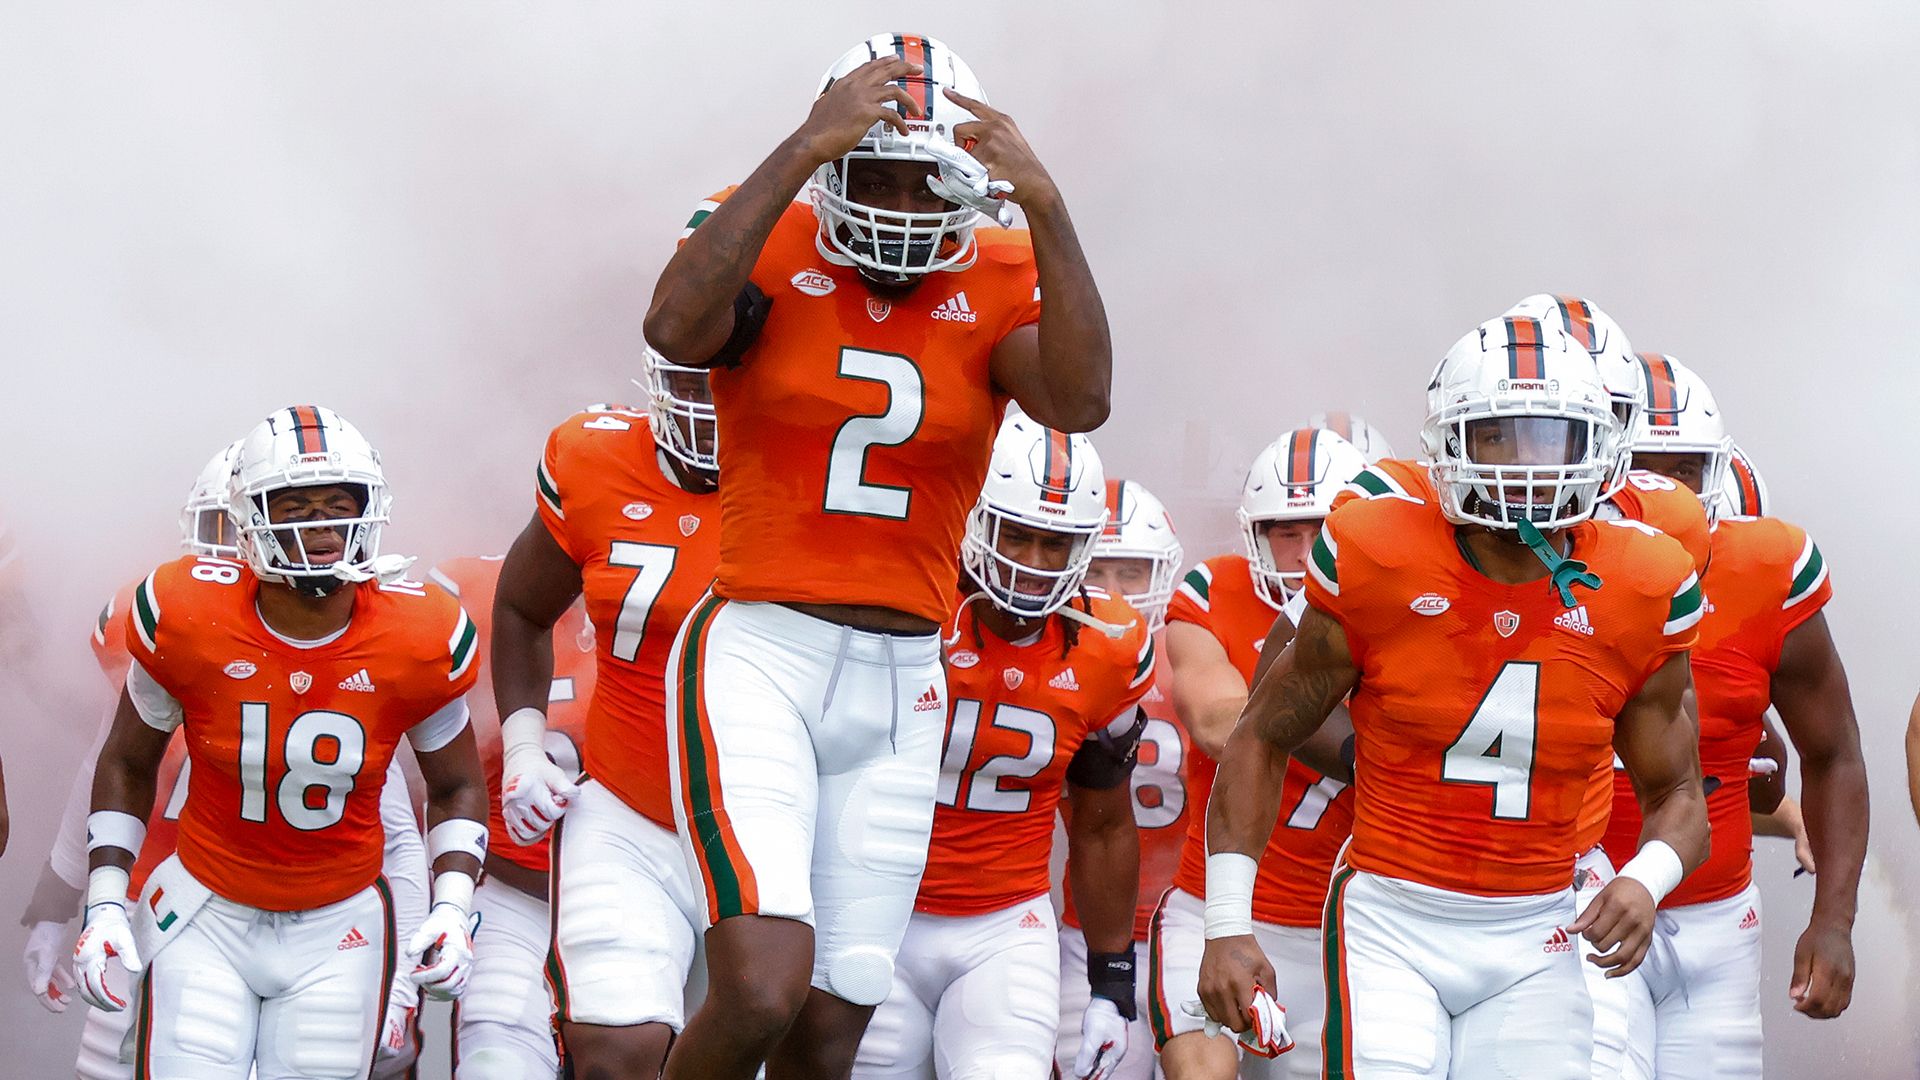 Canes Head to Virginia Tech for First ACC Road Test